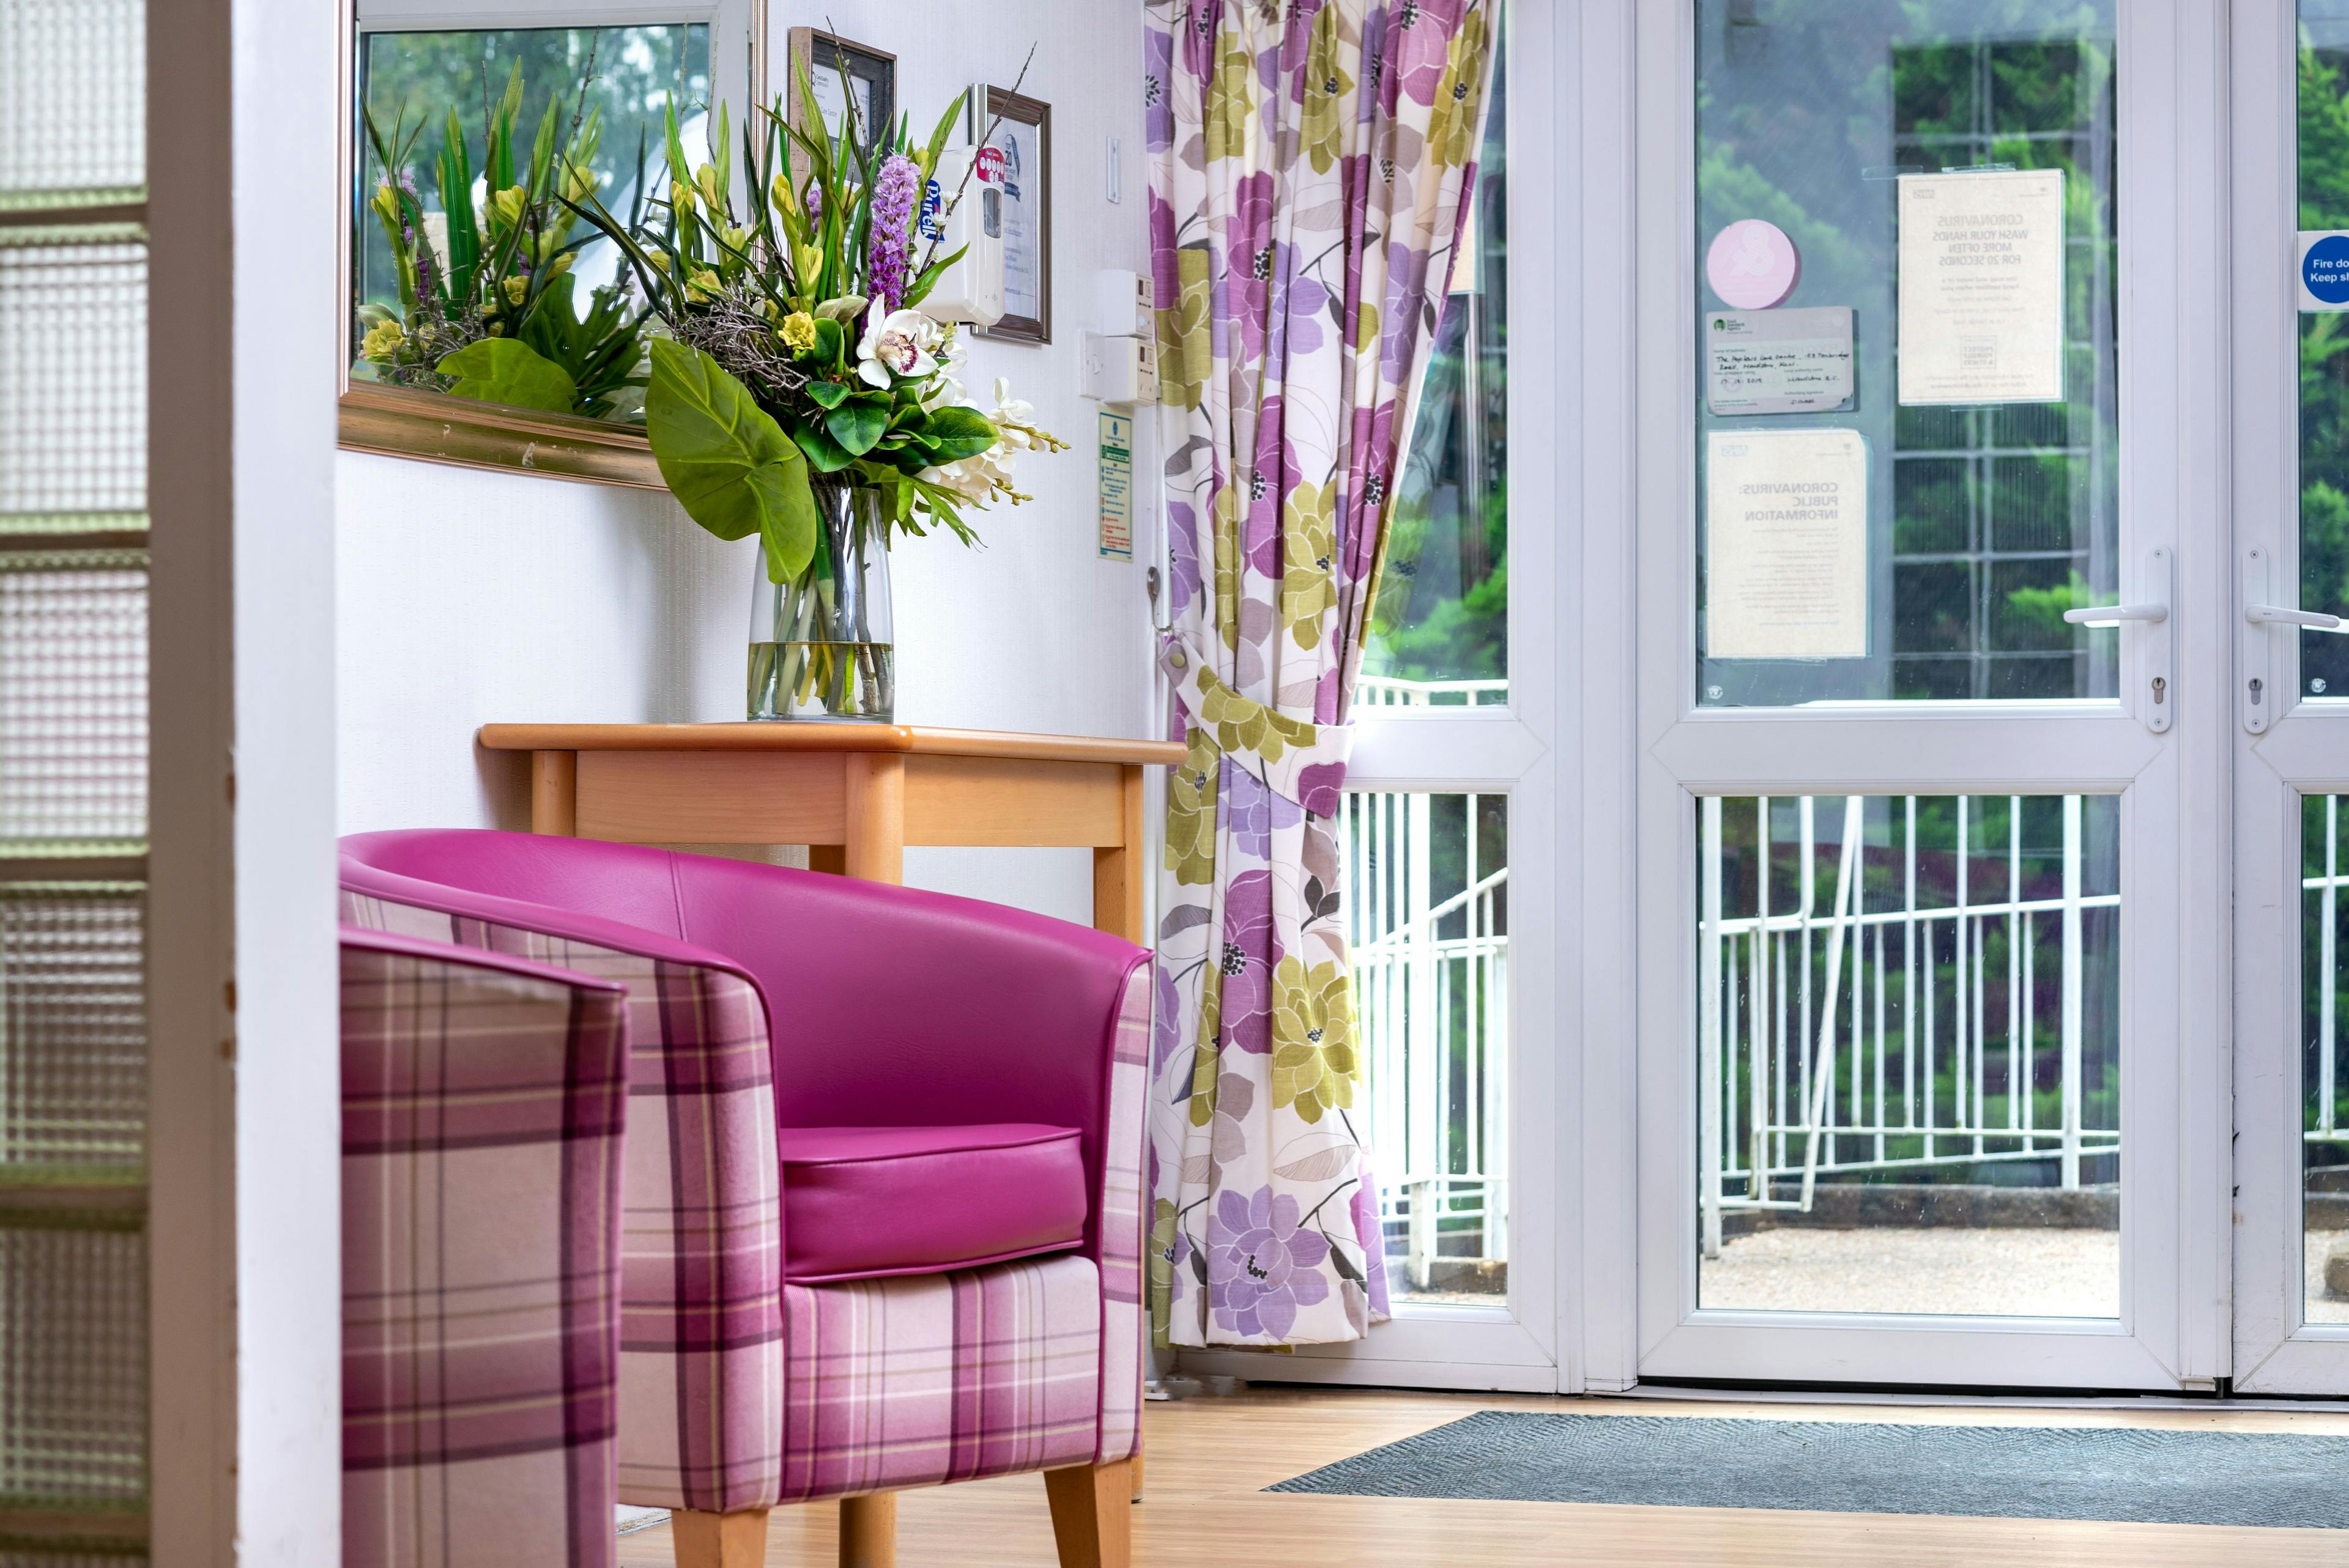 seating area of The Poplars care home in Maidstone, Kent